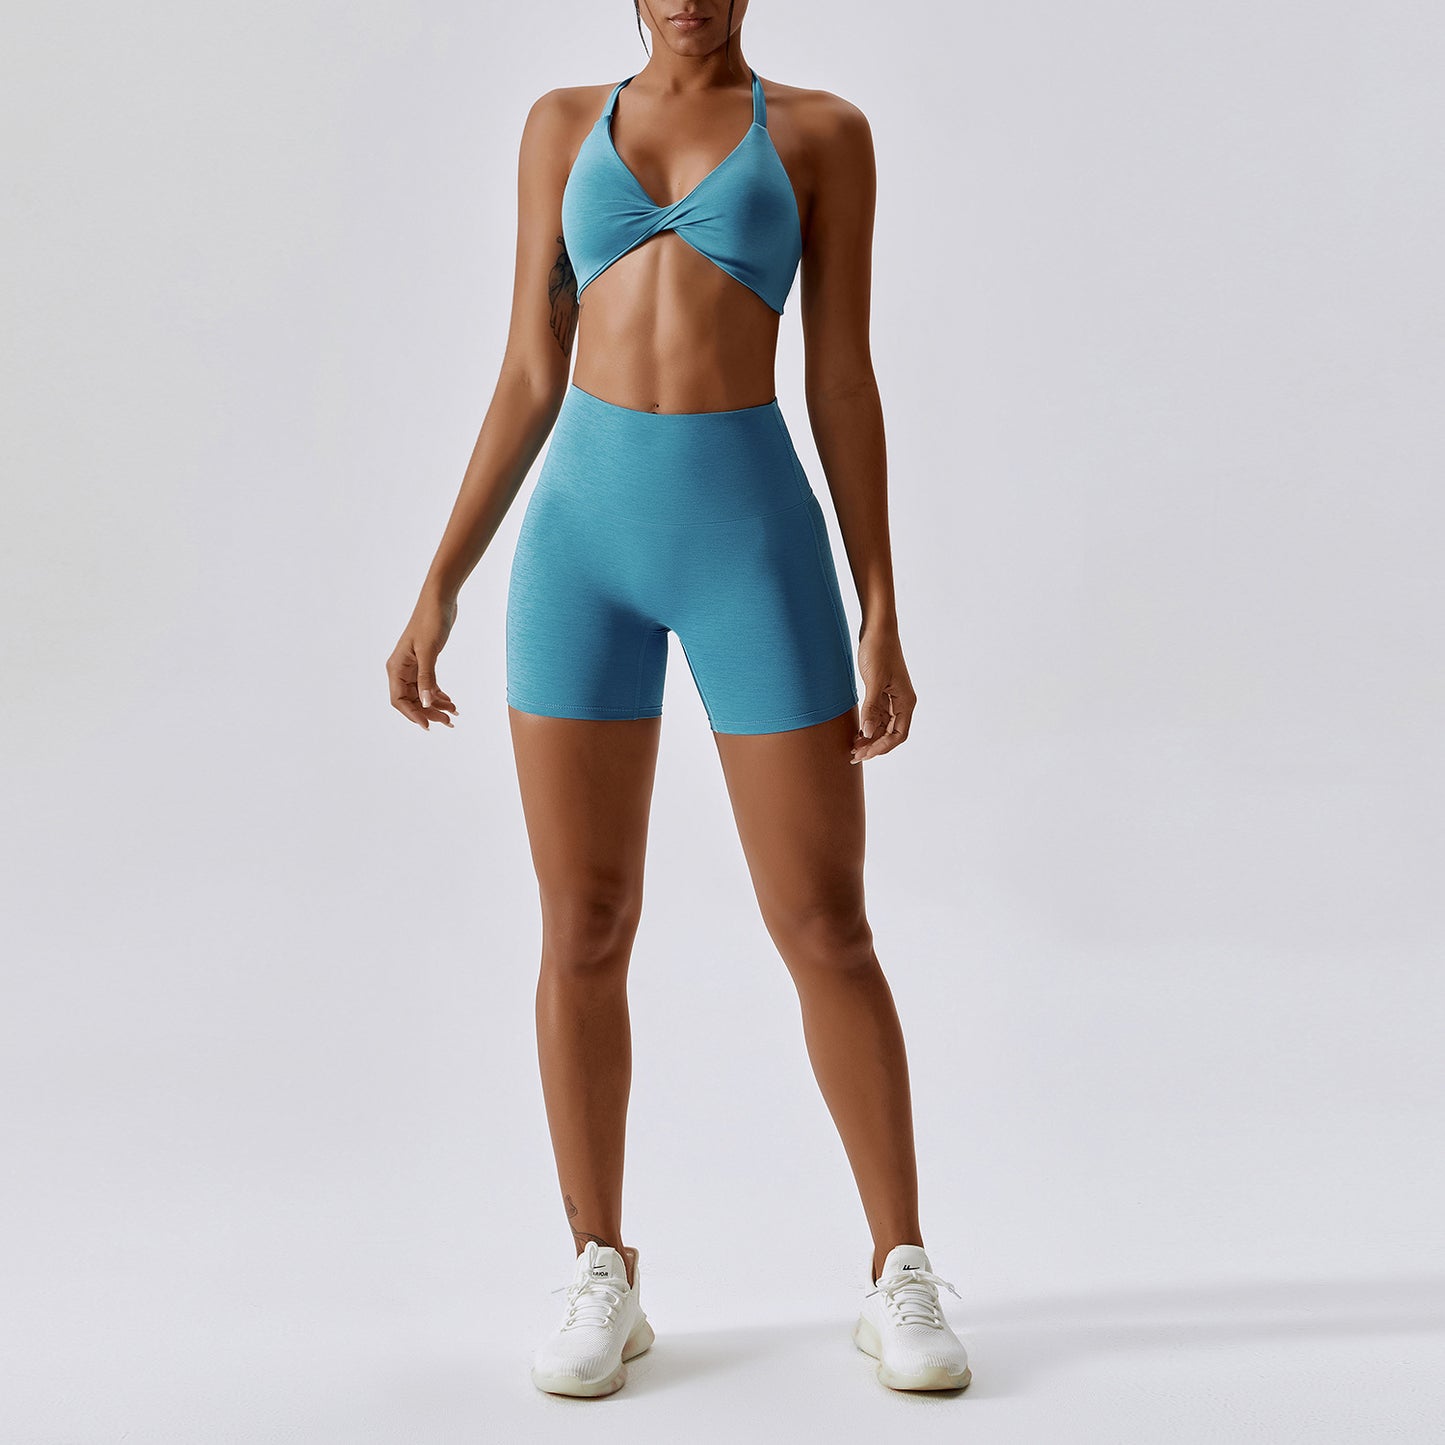 Sexy quick dry nude feeling sportswear cycling running fitness suit set 3 colors